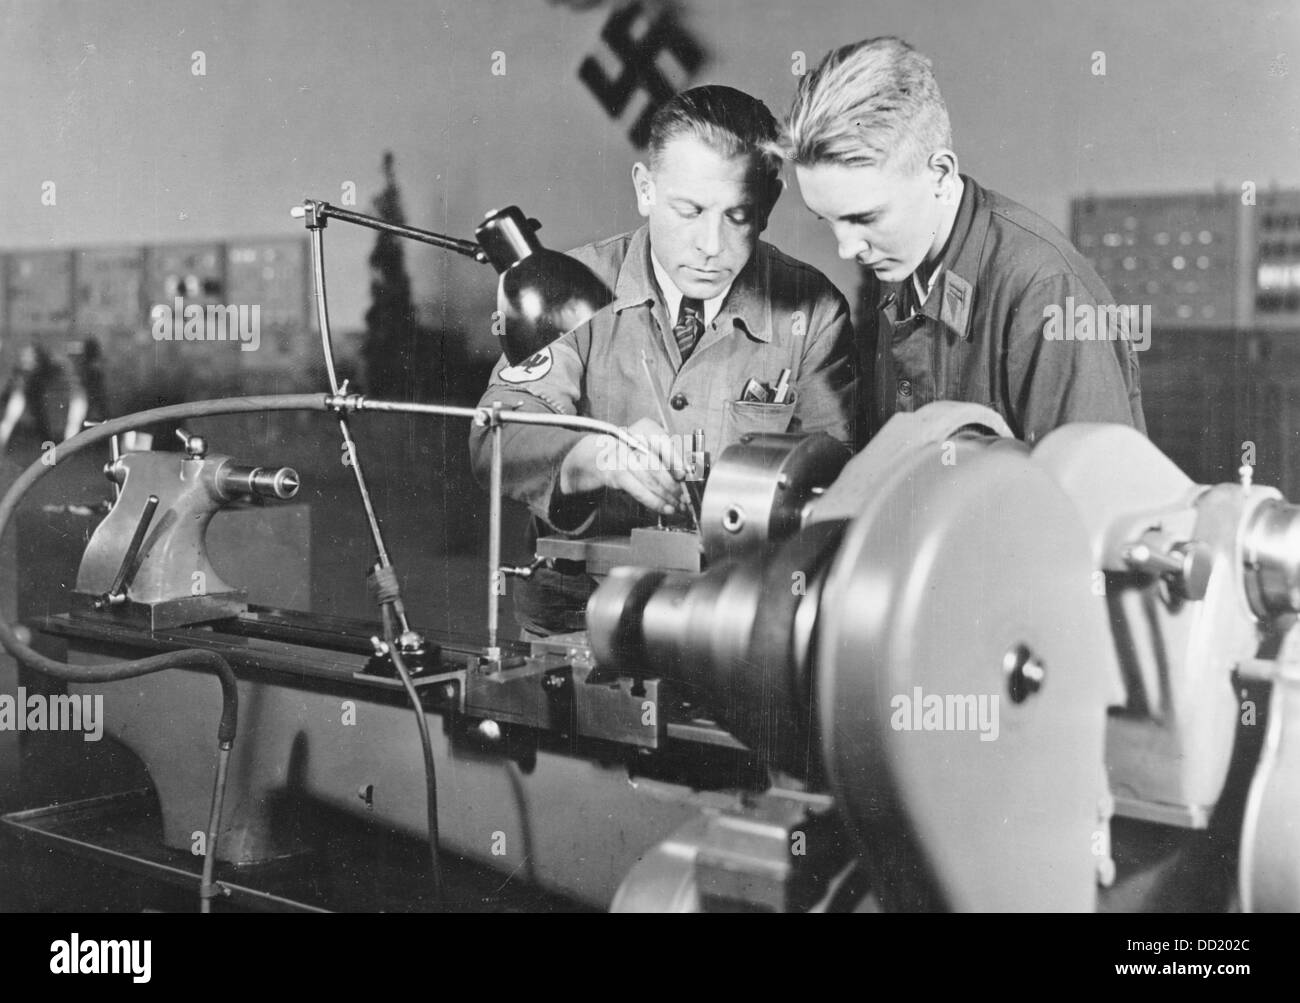 An apprentice of Ernst Heinkel Flugzeugwerke (Ernst Heinkel Aircraft Manufacturer) is pictured with a teacher during the production of aircraft parts between 1937-1943. Place unknown. The Ernst Heinkel Flugzeugwerke was one of the leading defense industry manufacturer in the Third Reich. Photo: Berliner Verlag/Archiv Stock Photo